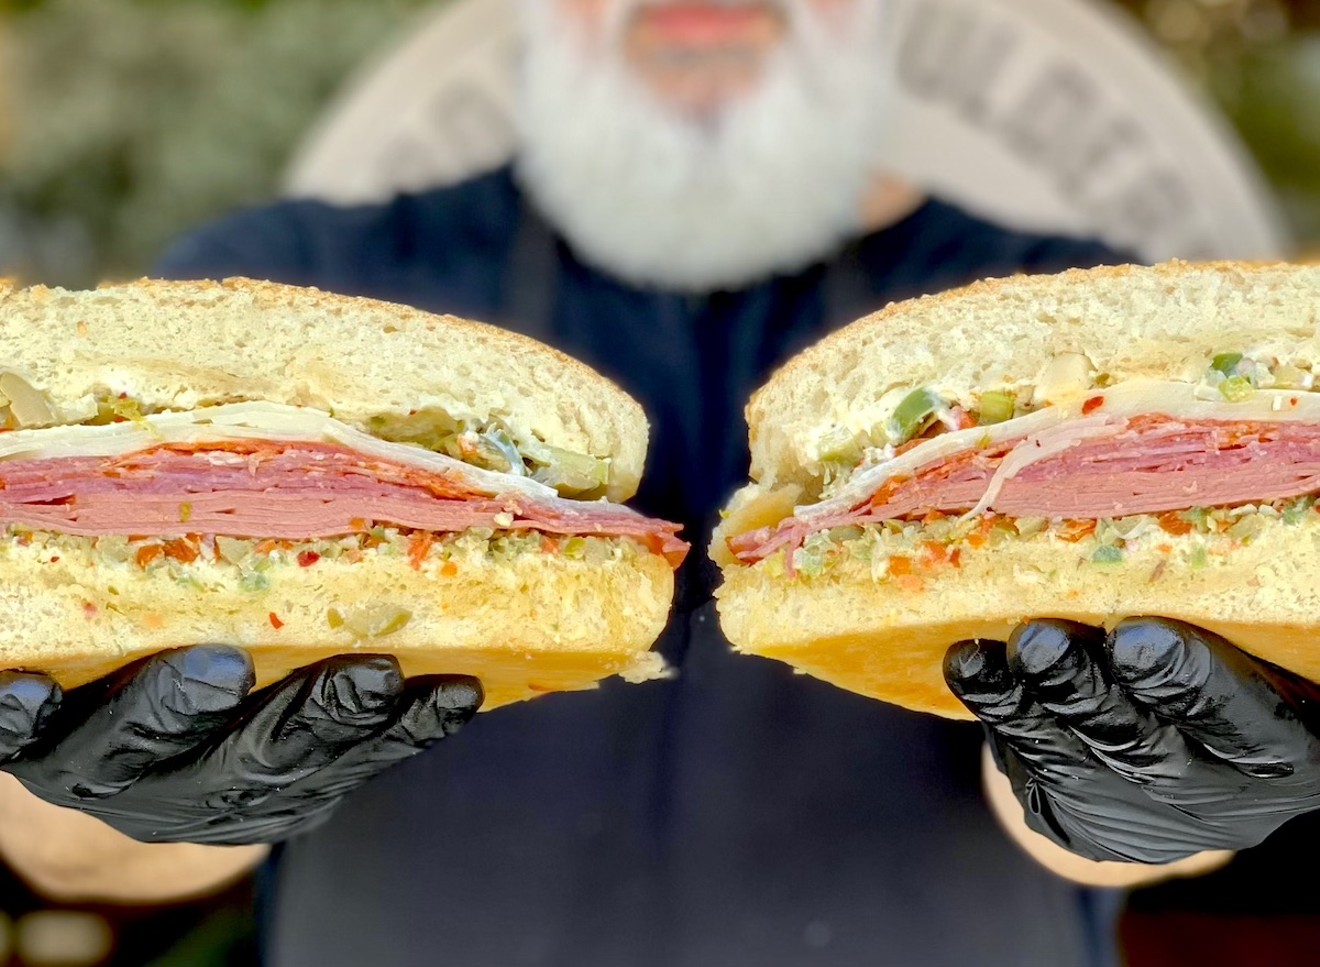 The limited-time muffuletta sandwich special from Broad Shoulders Sandwiches in Fort Lauderdale